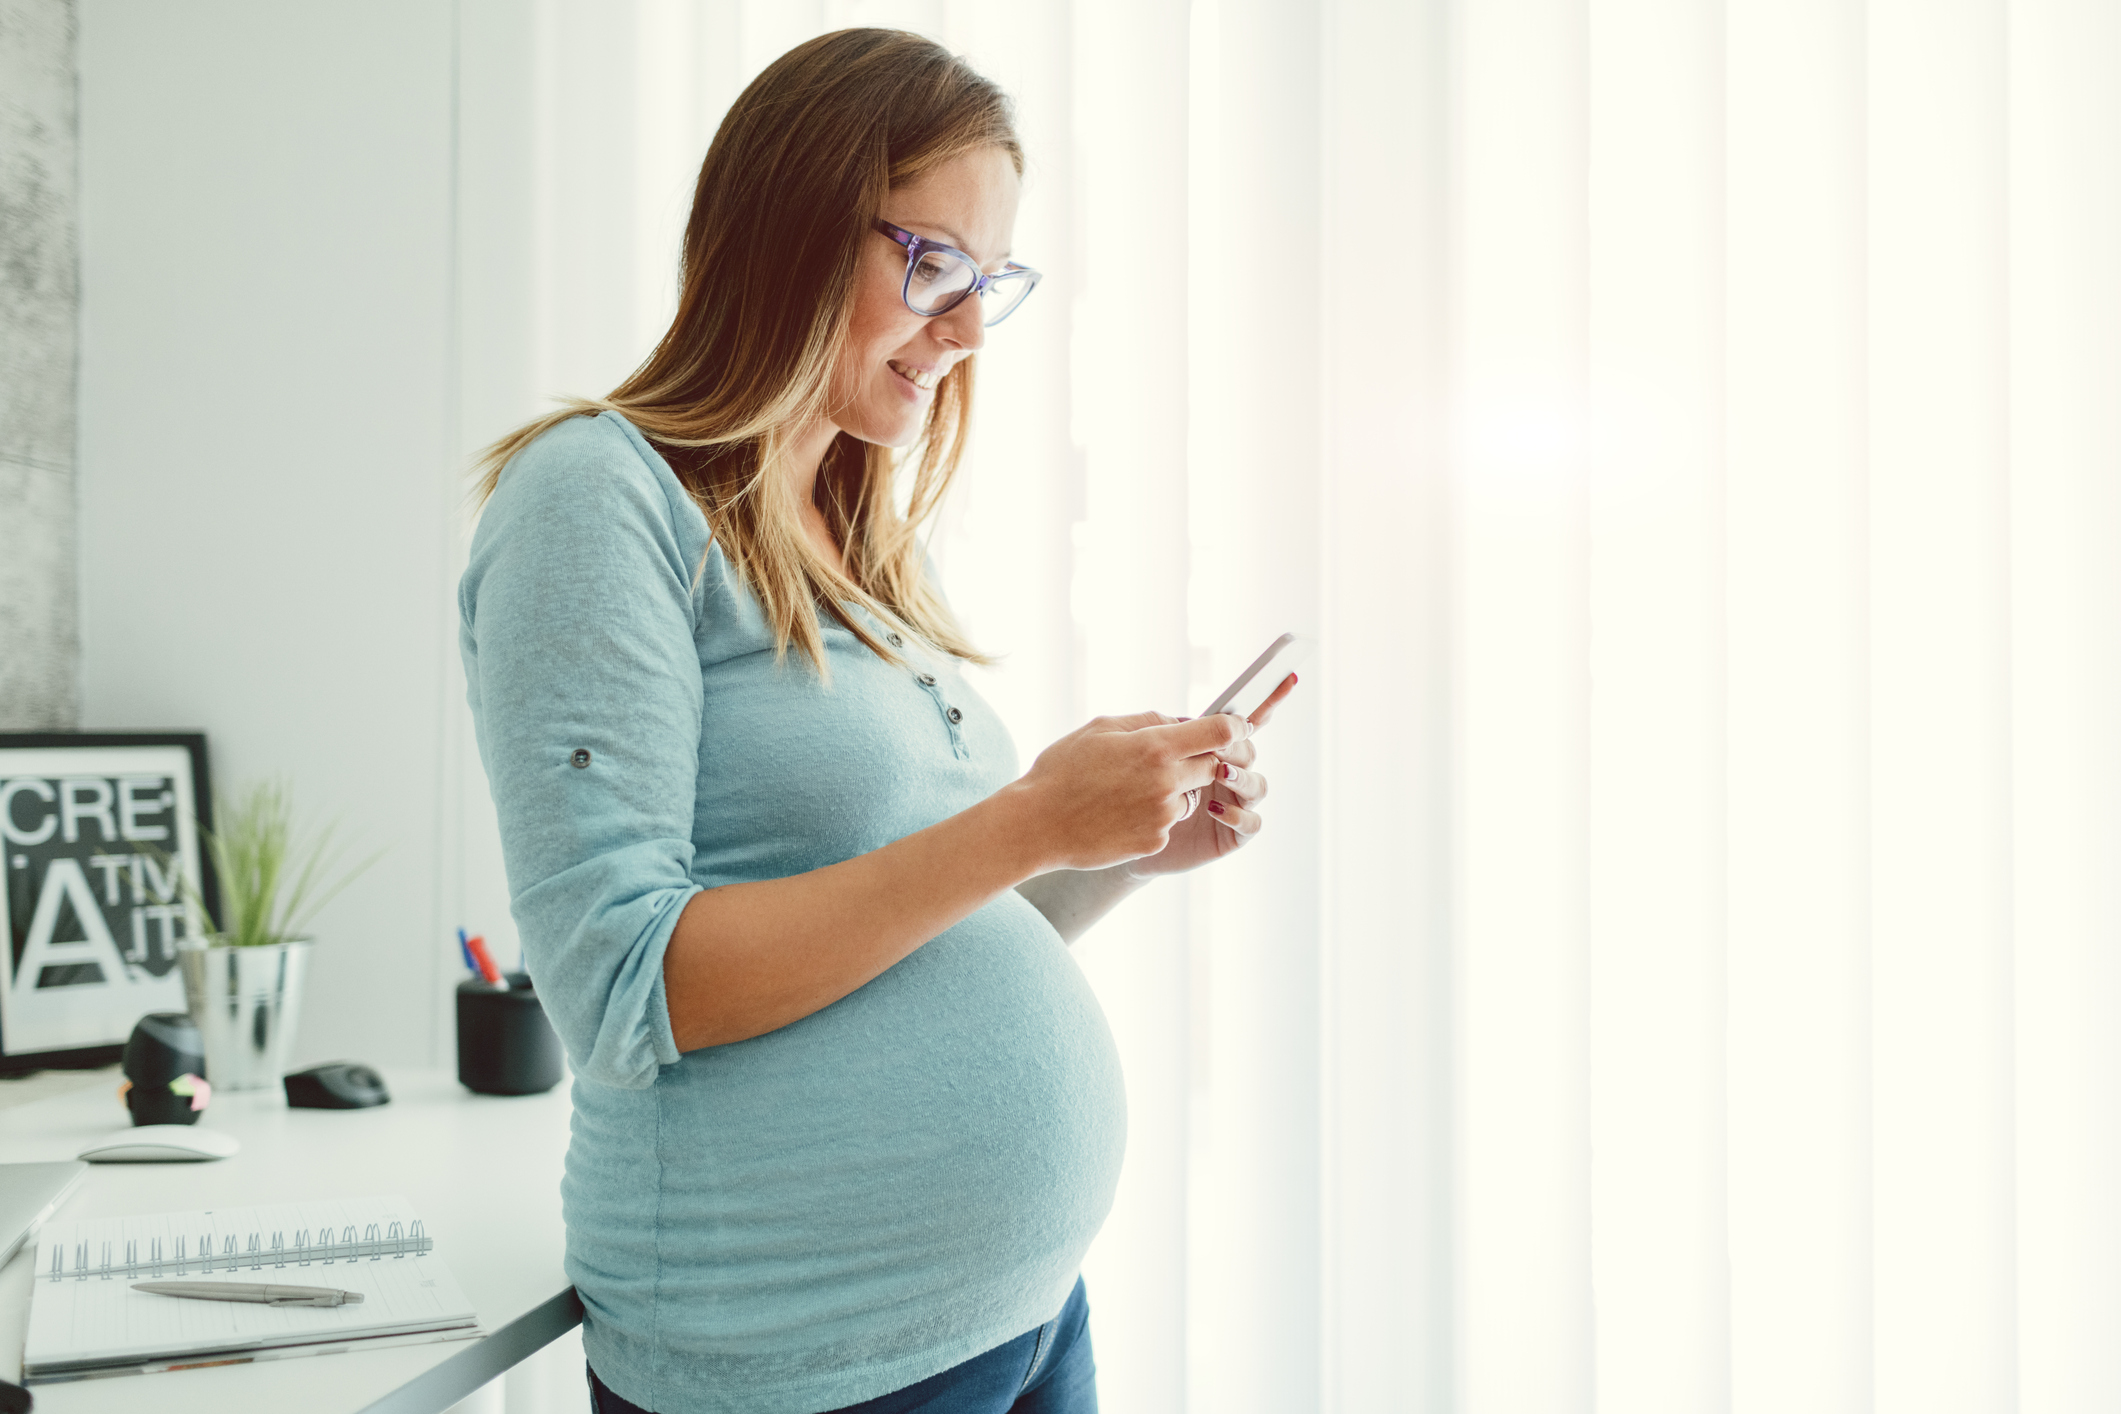 Pregnant Businesswoman Texting On Smart Phone In Her Home Office.